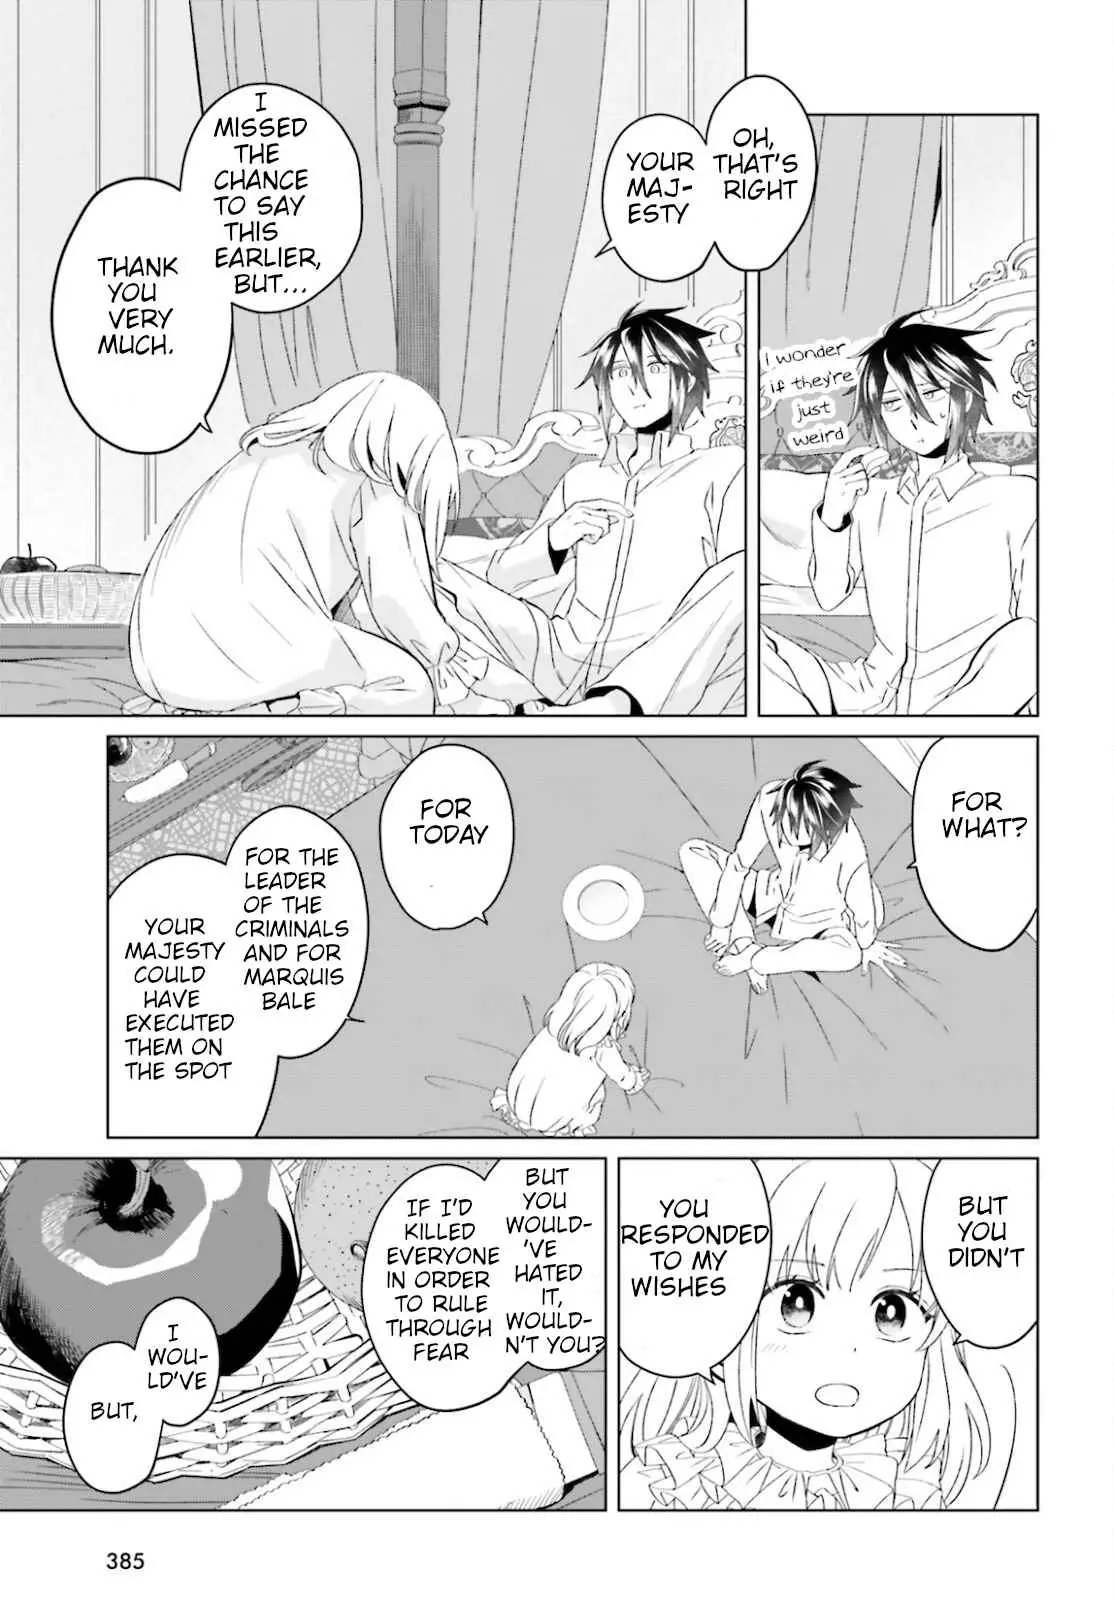 Win Over The Dragon Emperor This Time Around, Noble Girl! - 9 page 11-95c63165